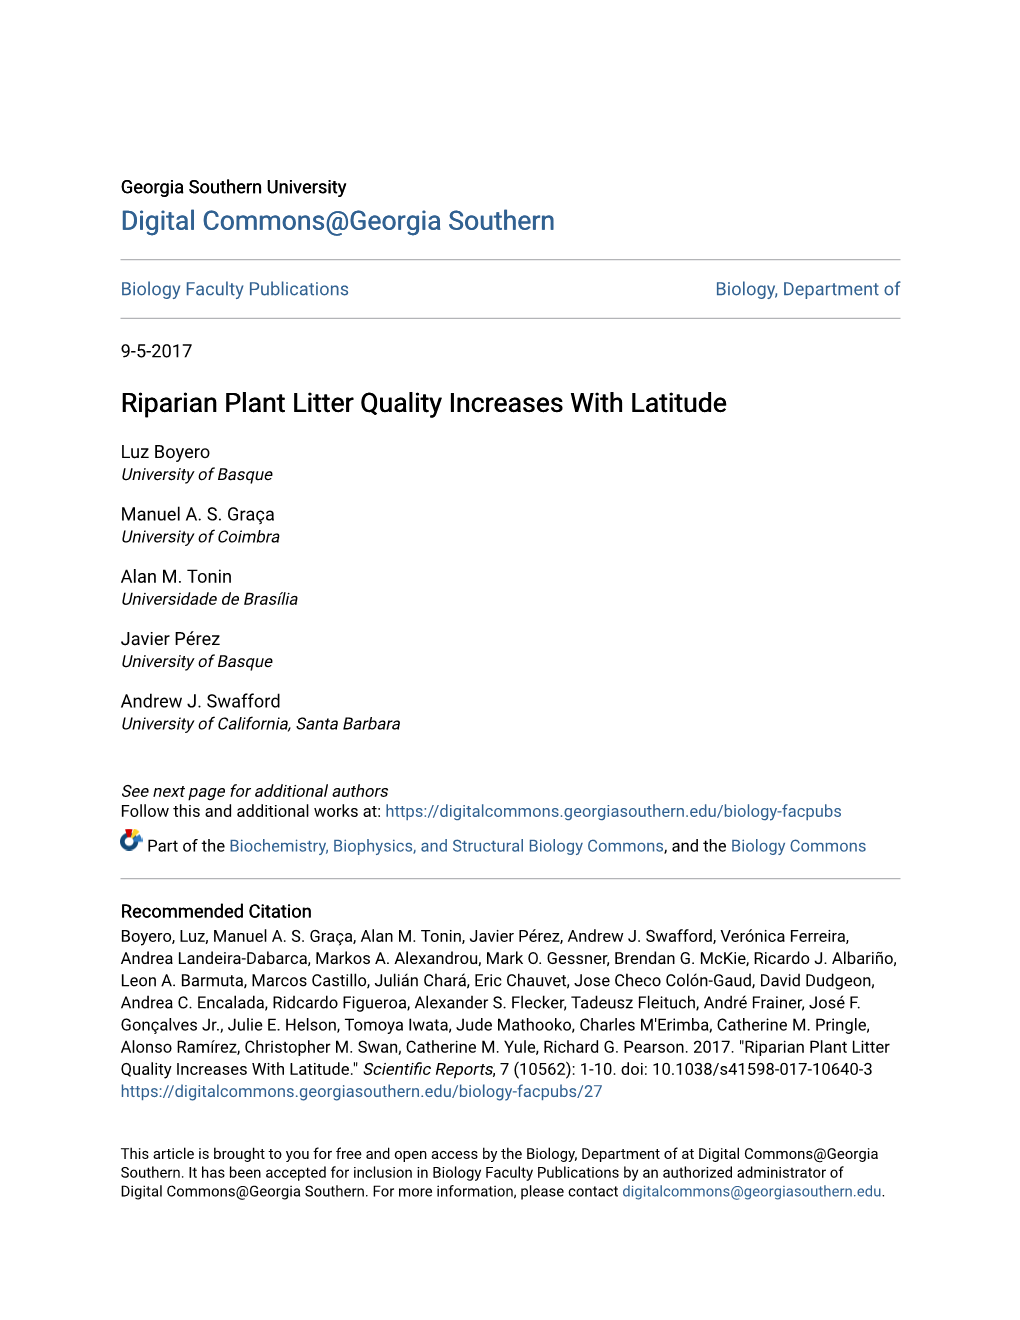 Riparian Plant Litter Quality Increases with Latitude